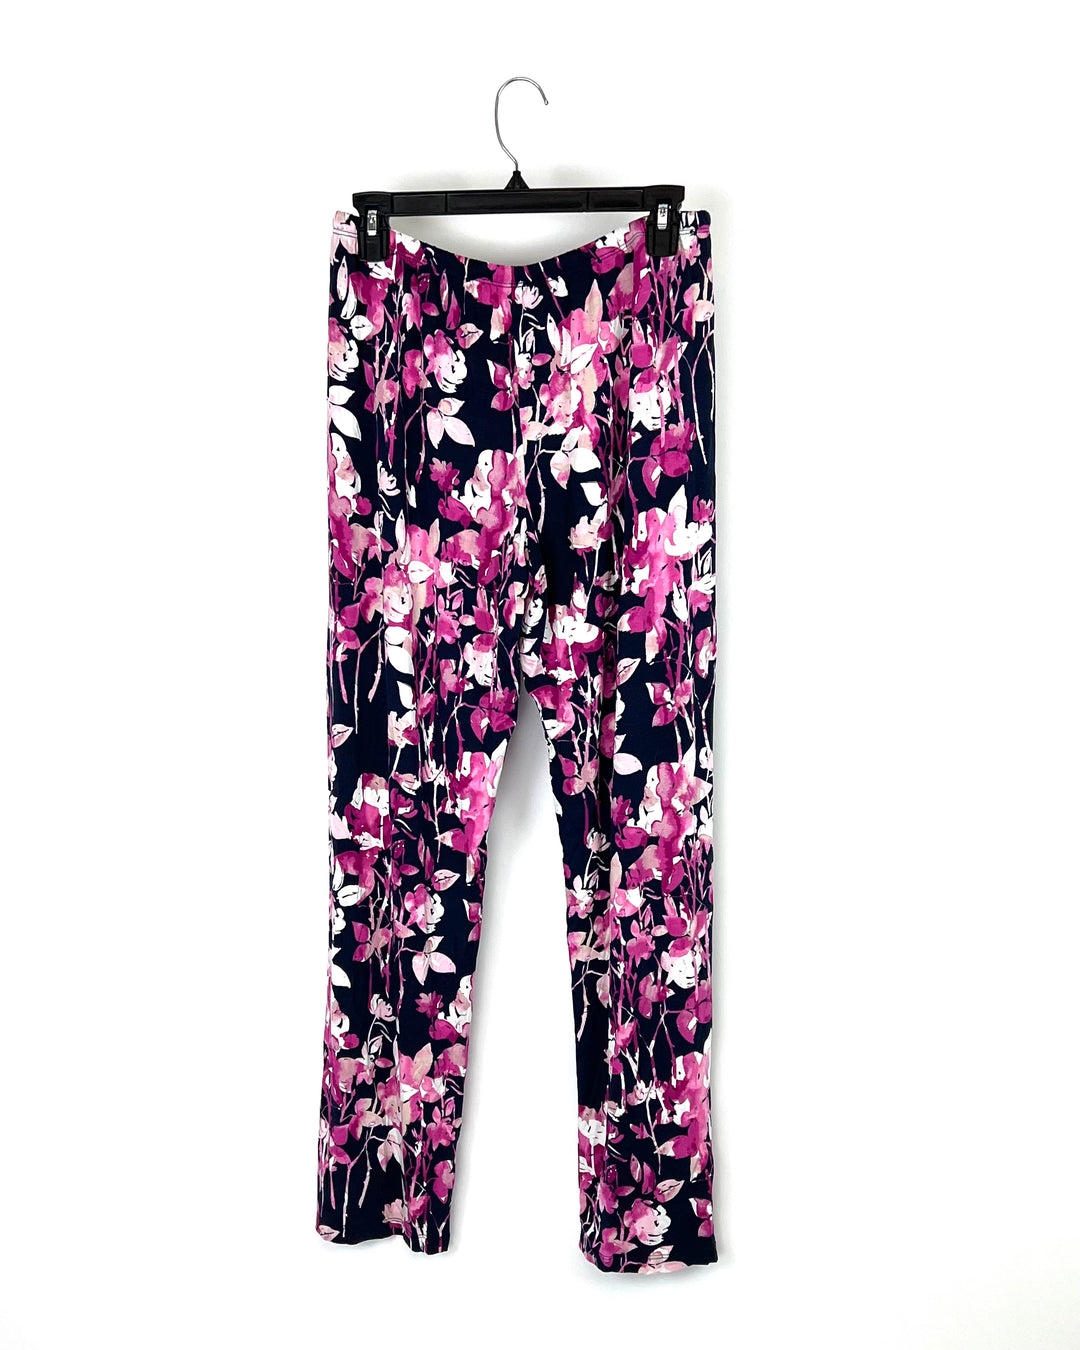 Navy Blue and Pink Floral Print Sleepwear Bottoms - Size 4-6